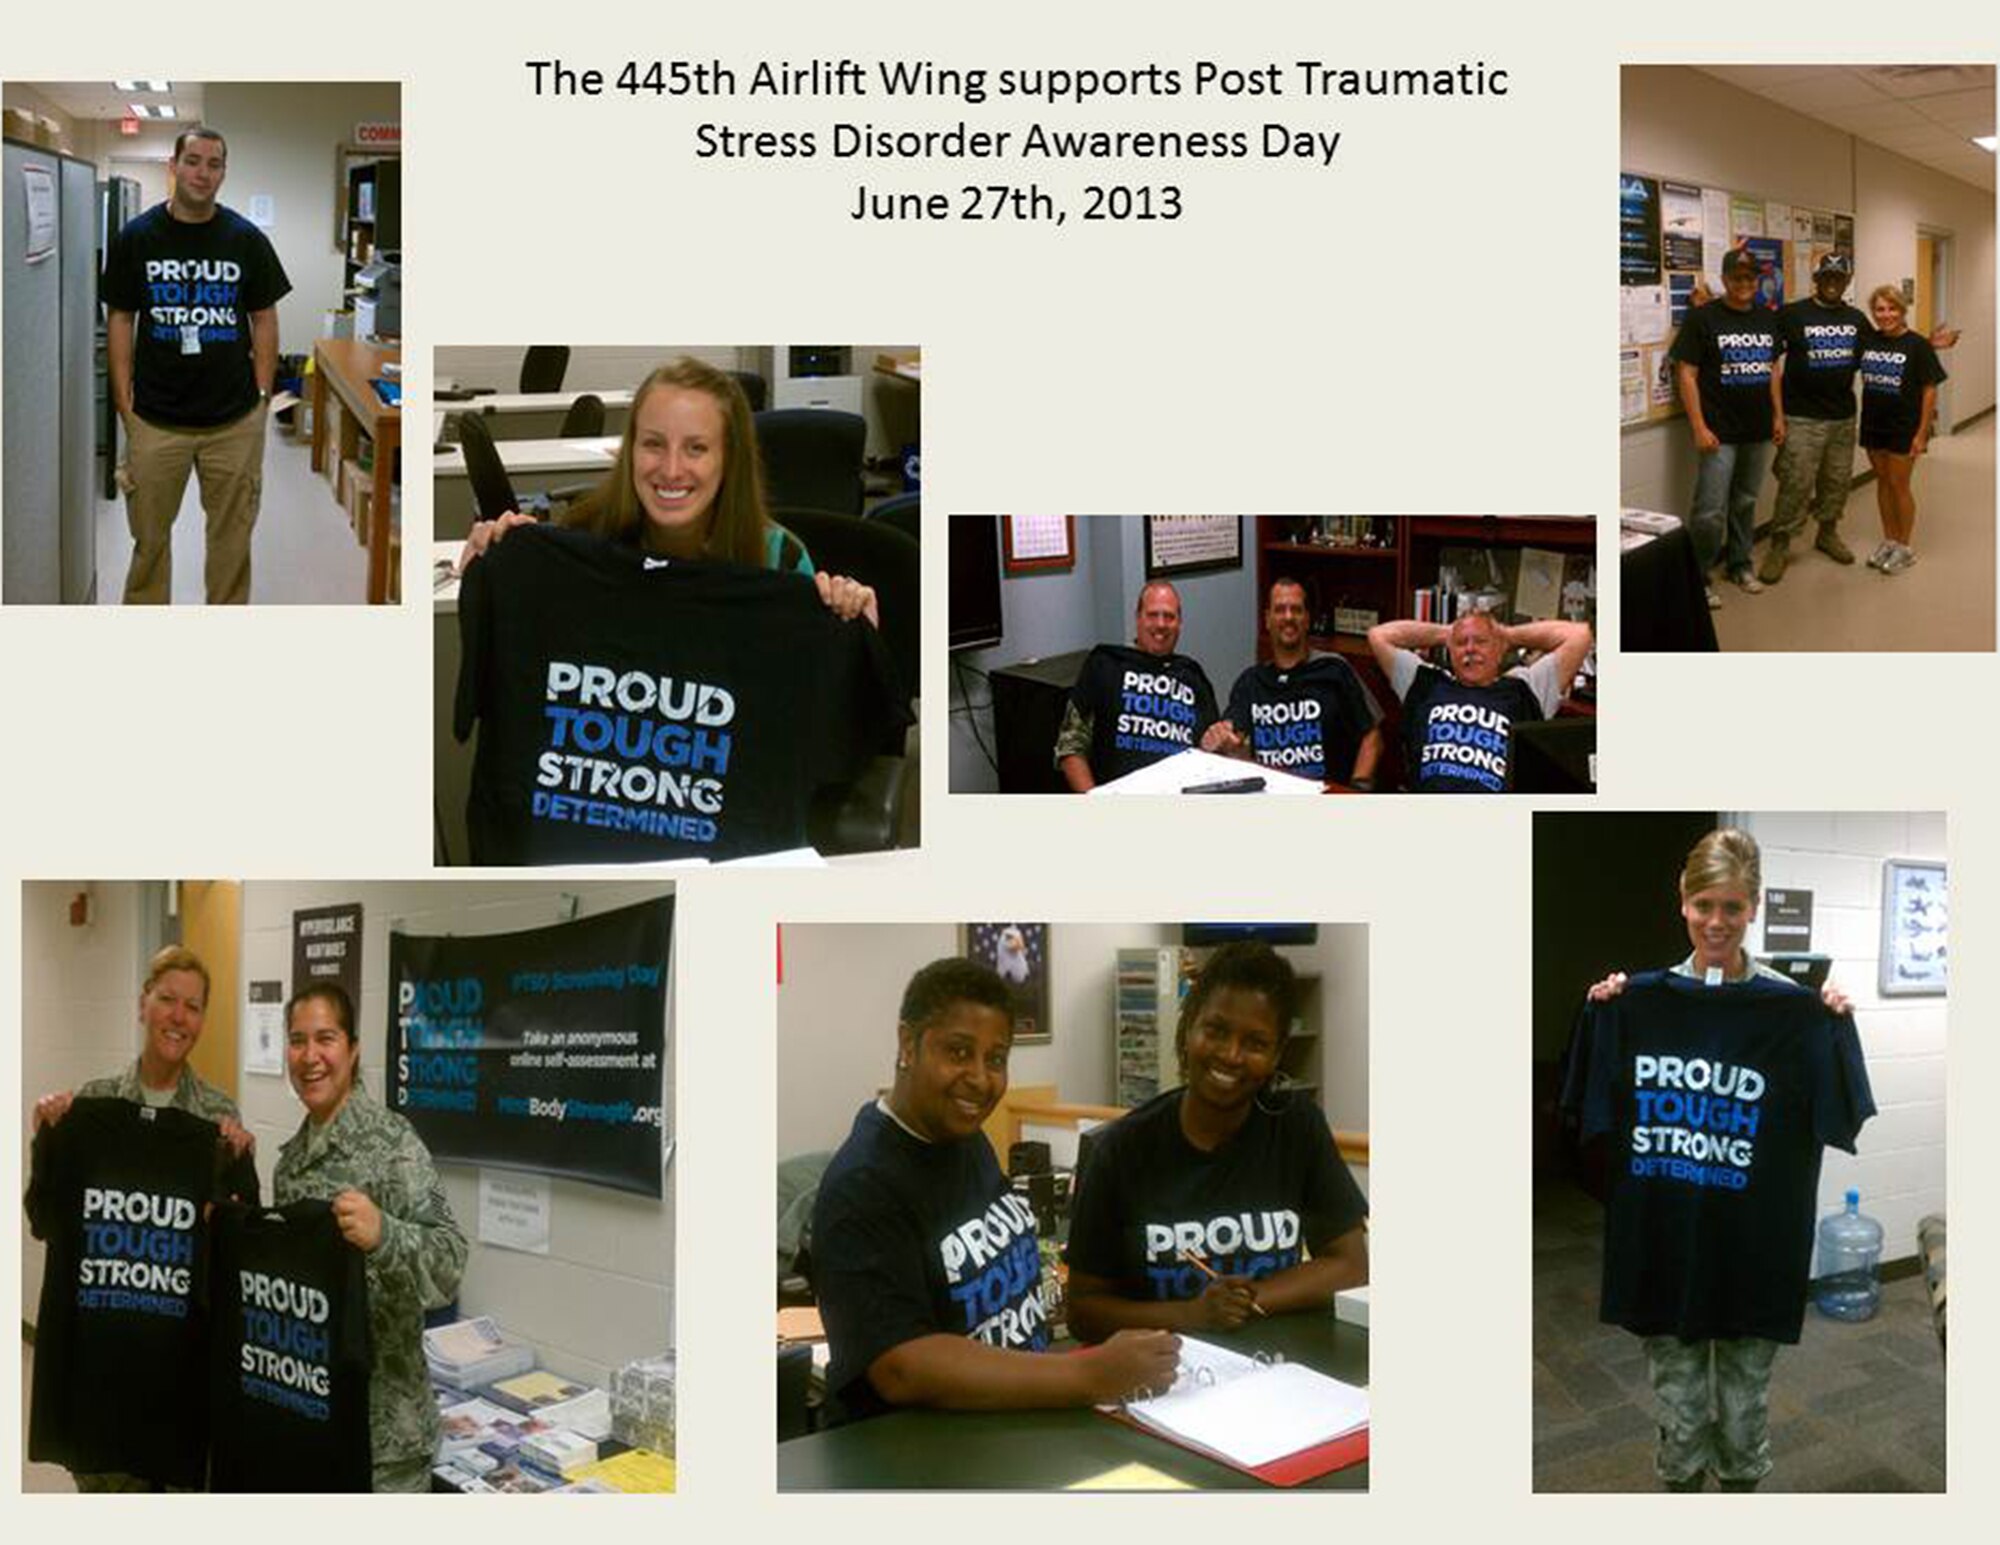 WRIGHT-PATTERSON AIR FORCE BASE, Ohio – The 445th Airlift Wing supported Post Traumatic Stress Disorder Awareness Day June 27. To show their support, t-shirts printed with the words, “PROUD, TOUGH, STRONG, DETERMINED” were worn by wing members throughout the day. (Courtesy photo)